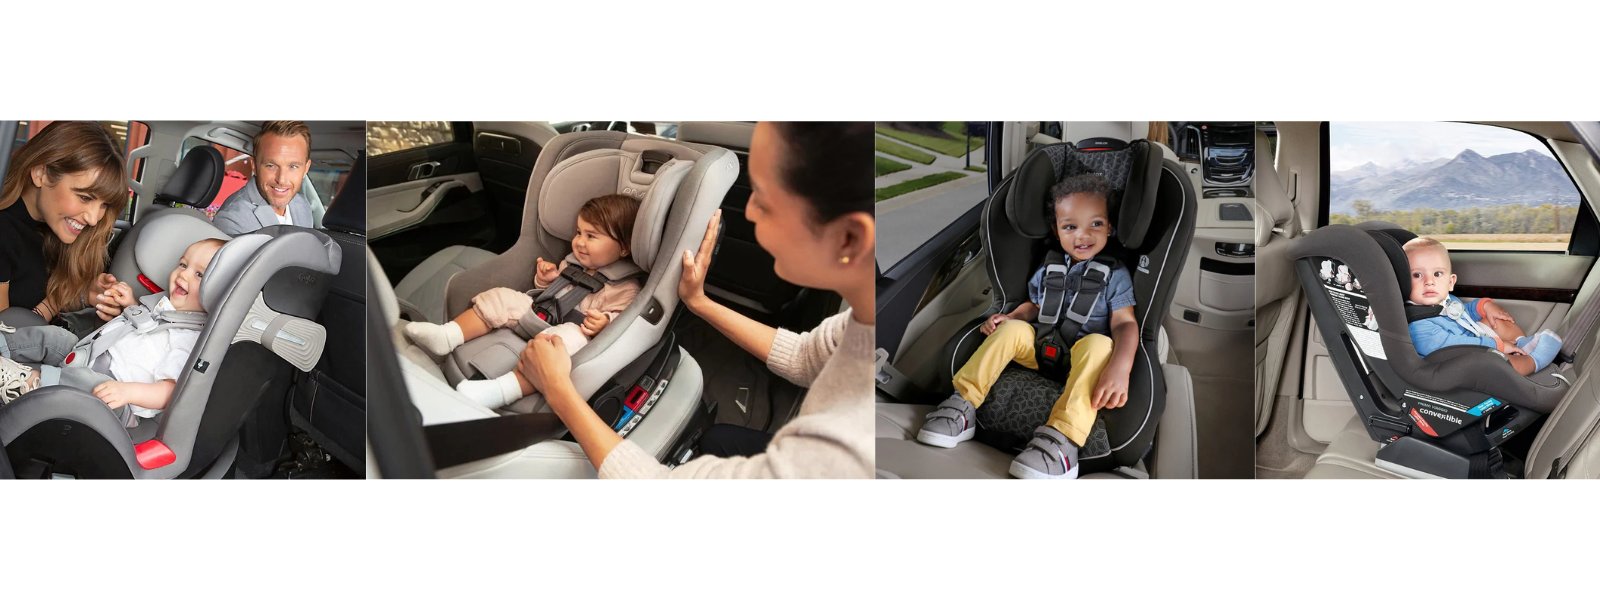  Safety 1st Grand 2-in-1 Booster Car Seat, Forward